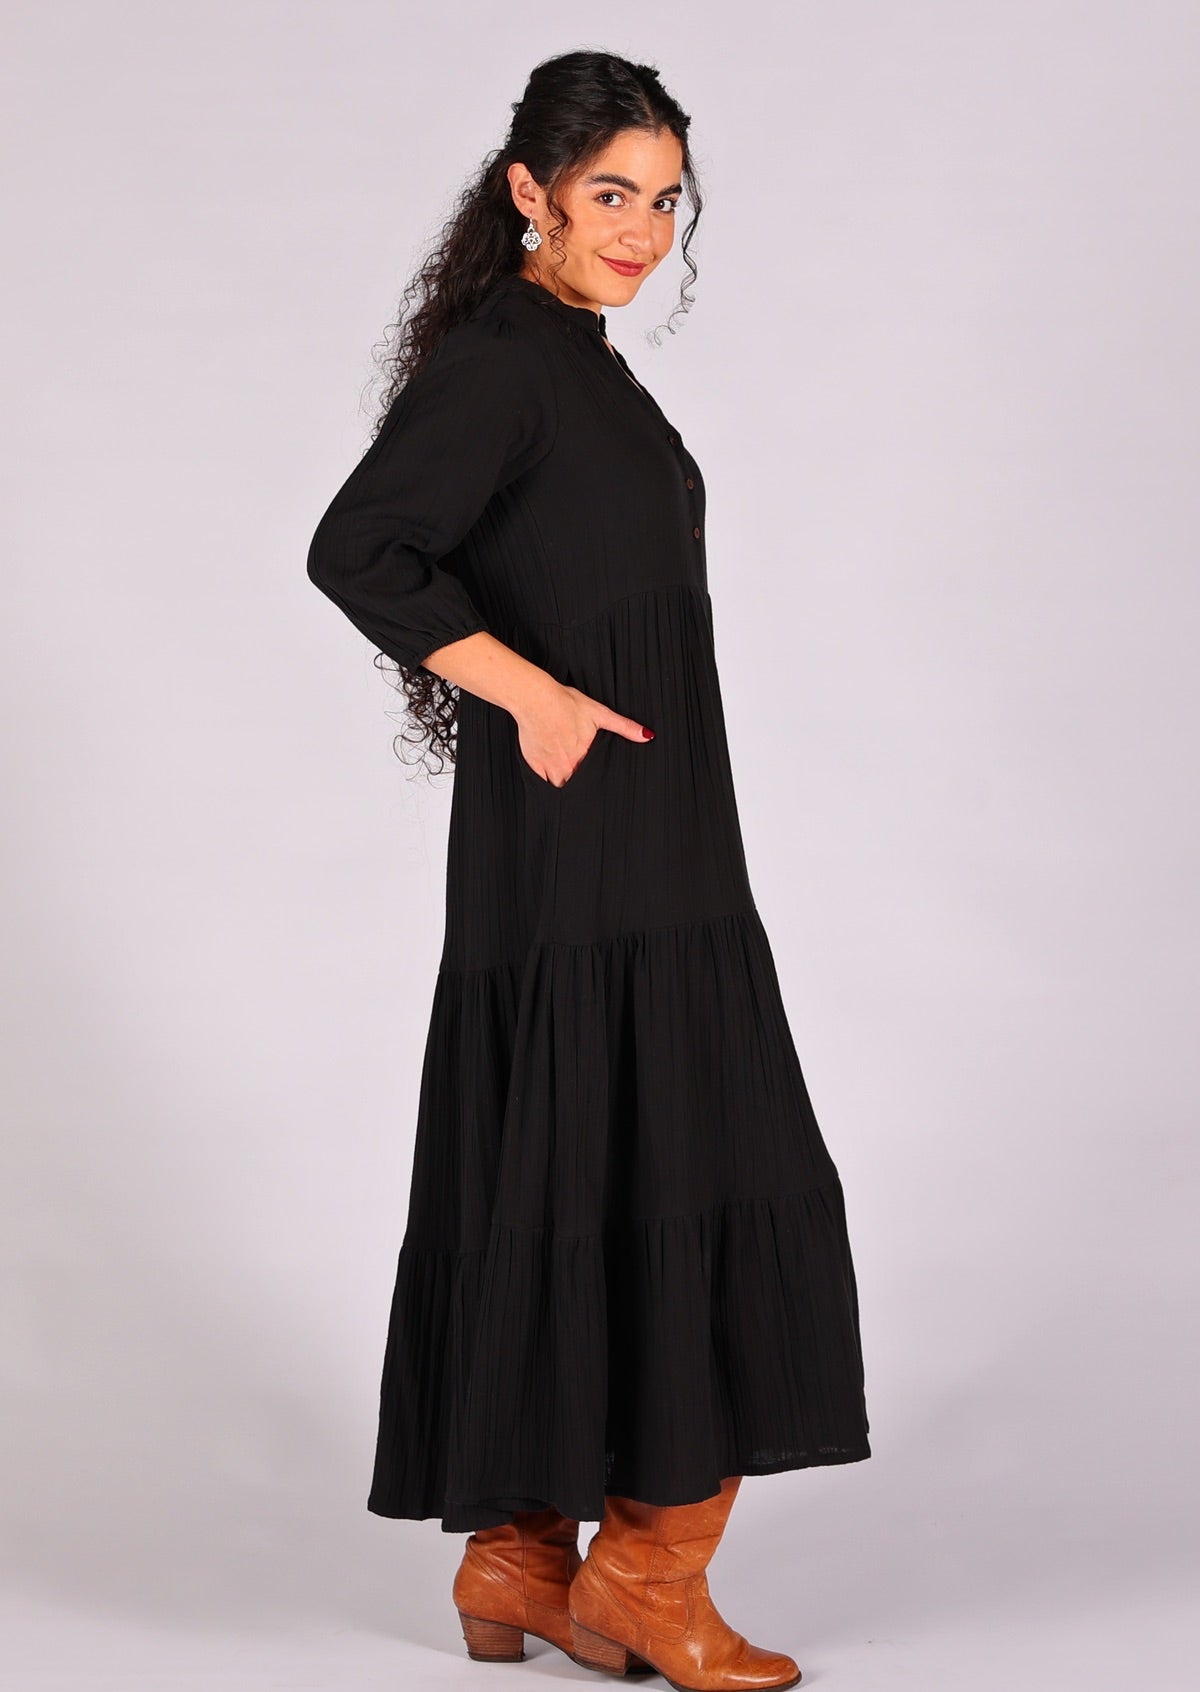 Double cotton maxi dress in black with 3/4 sleeves and hidden side pockets